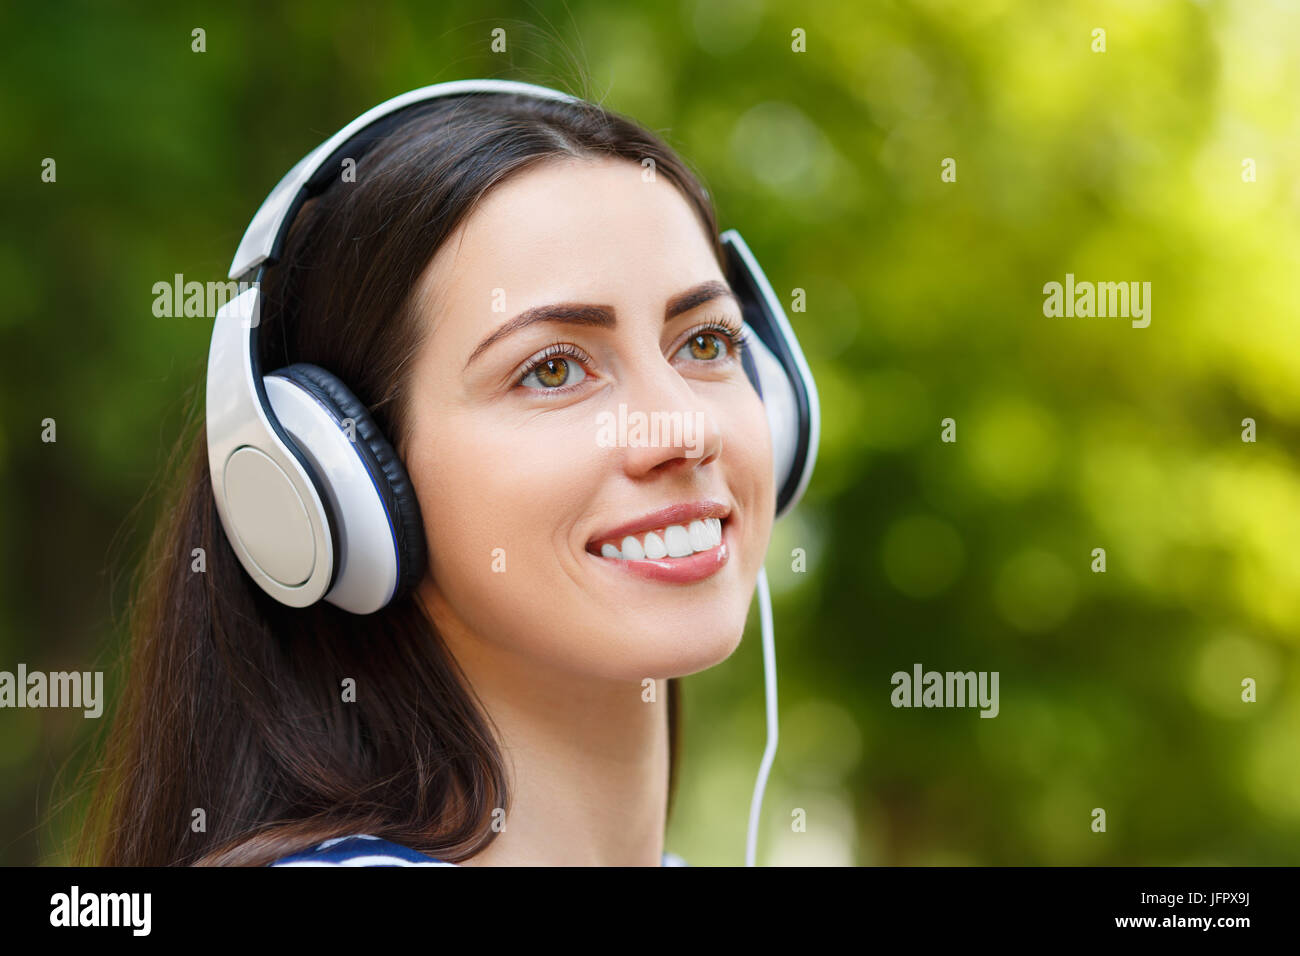 closeup portrait of young happy smiling brunette woman with headphones outdoors on summer day. Girl listening music in headphones in park Stock Photo